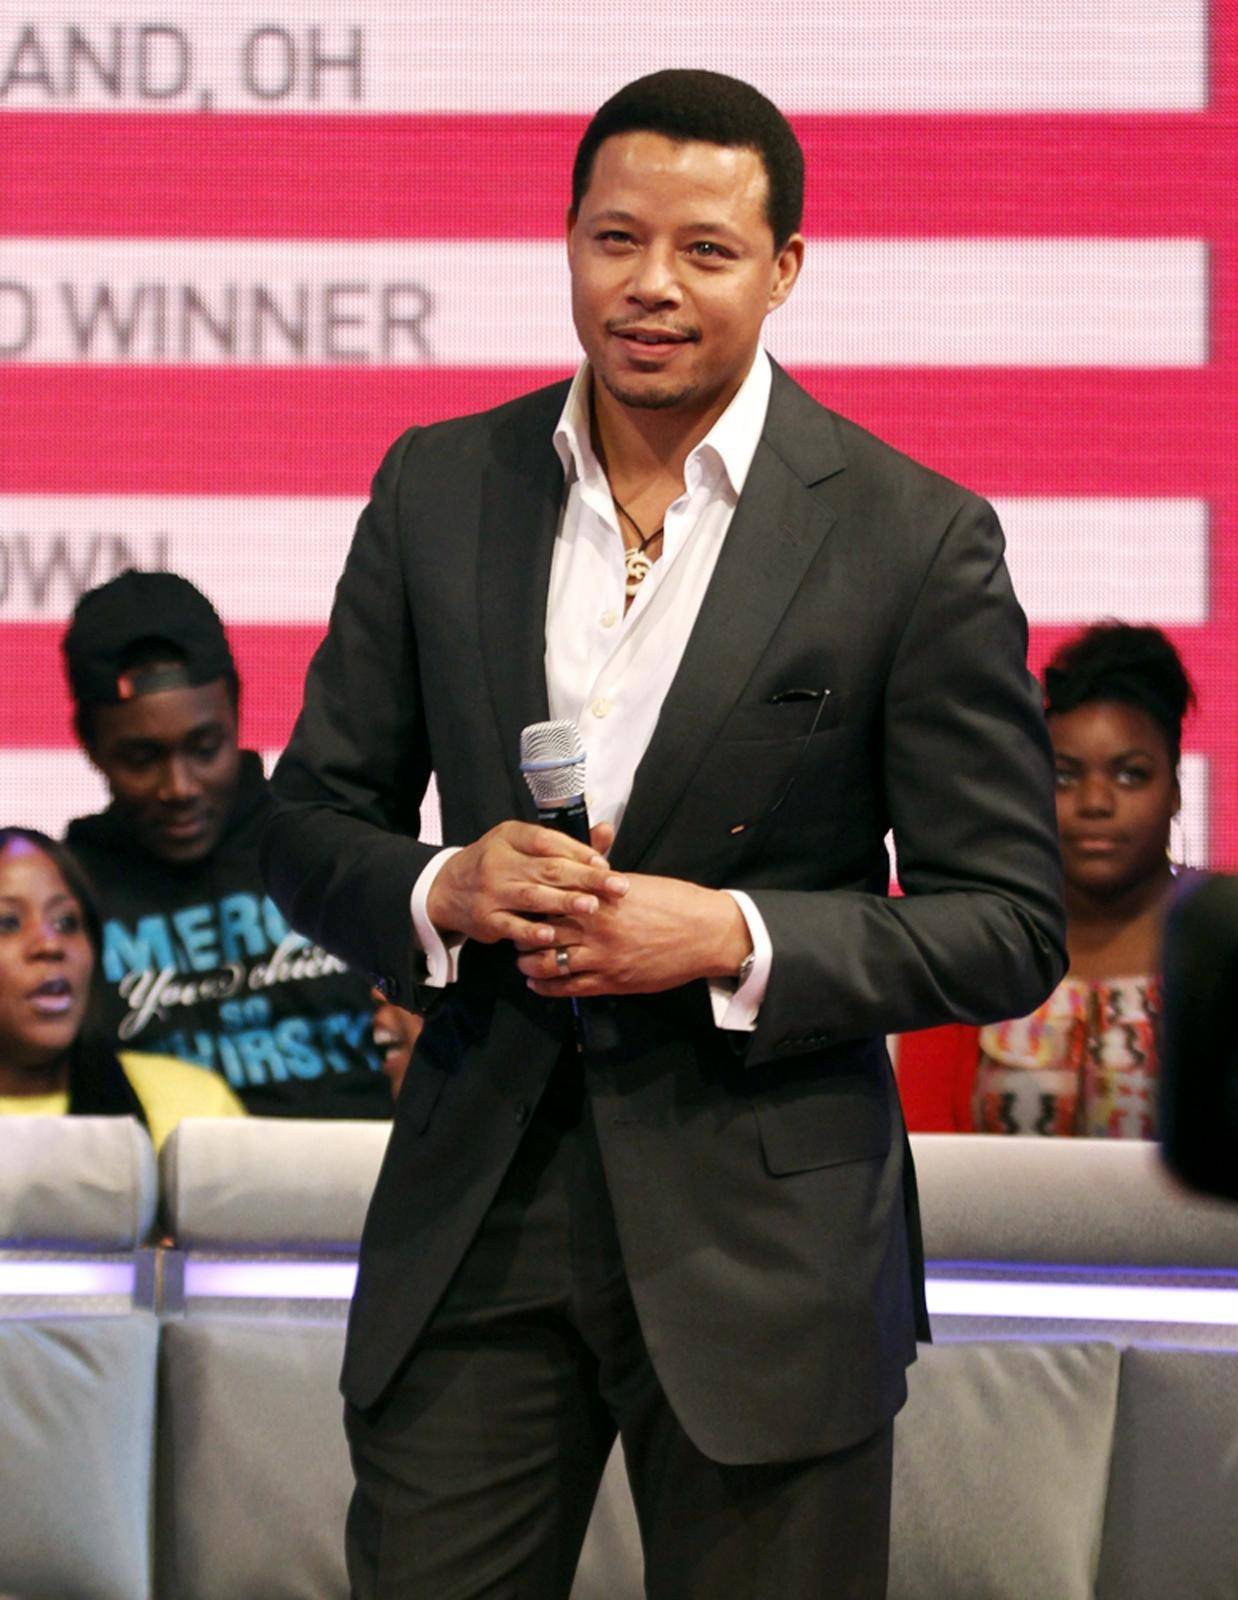 "106th & Park" Presents Terrence Howard and Juicy J - New York City